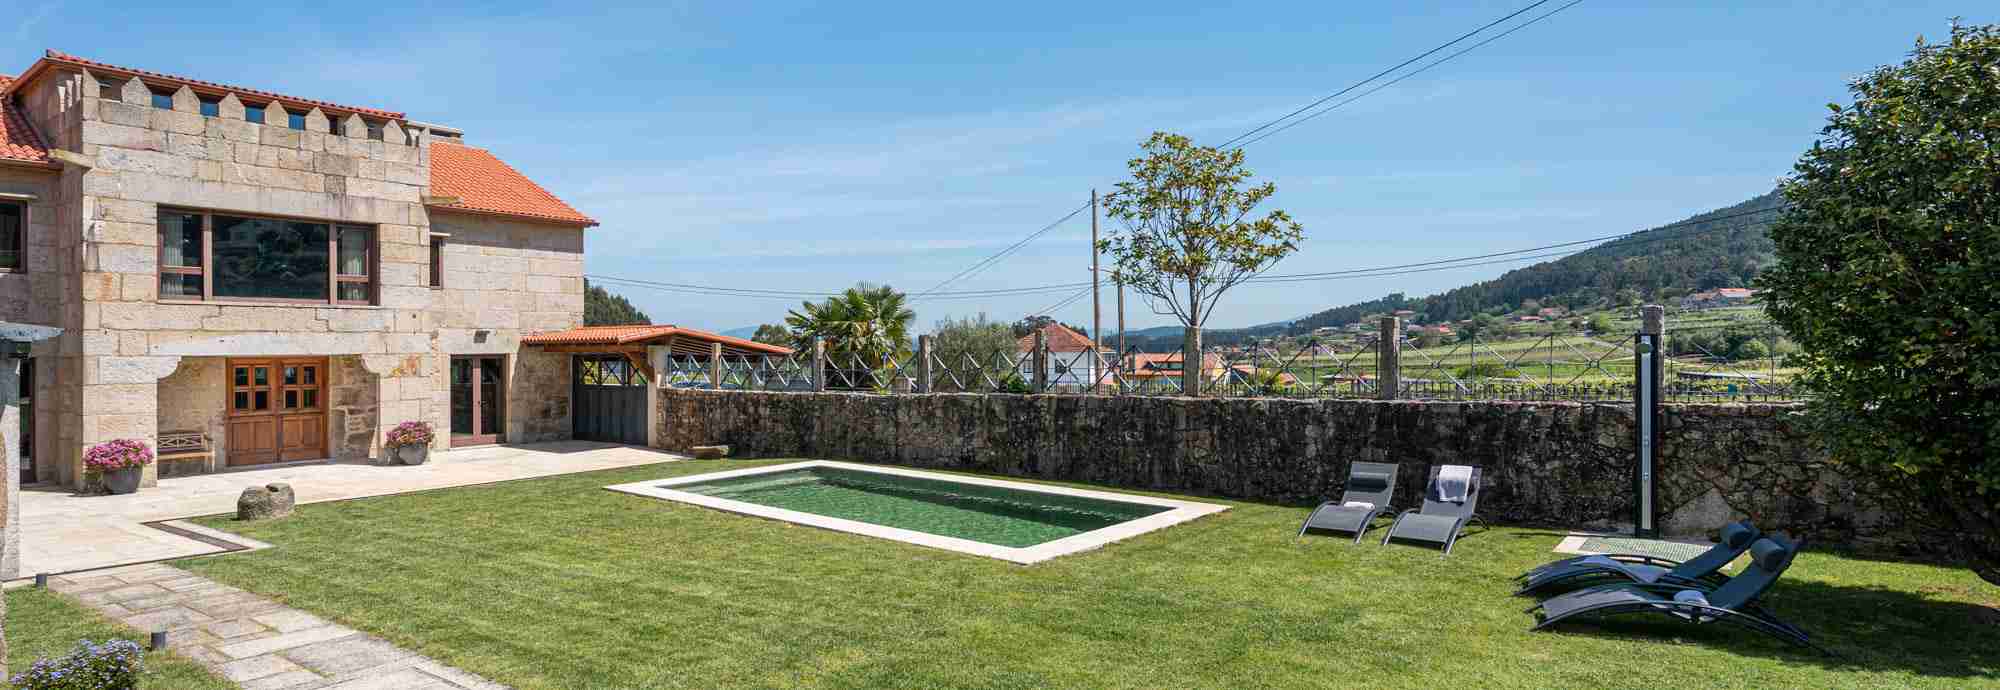 Large villa close to amazing beaches in popular region of Southern Galicia